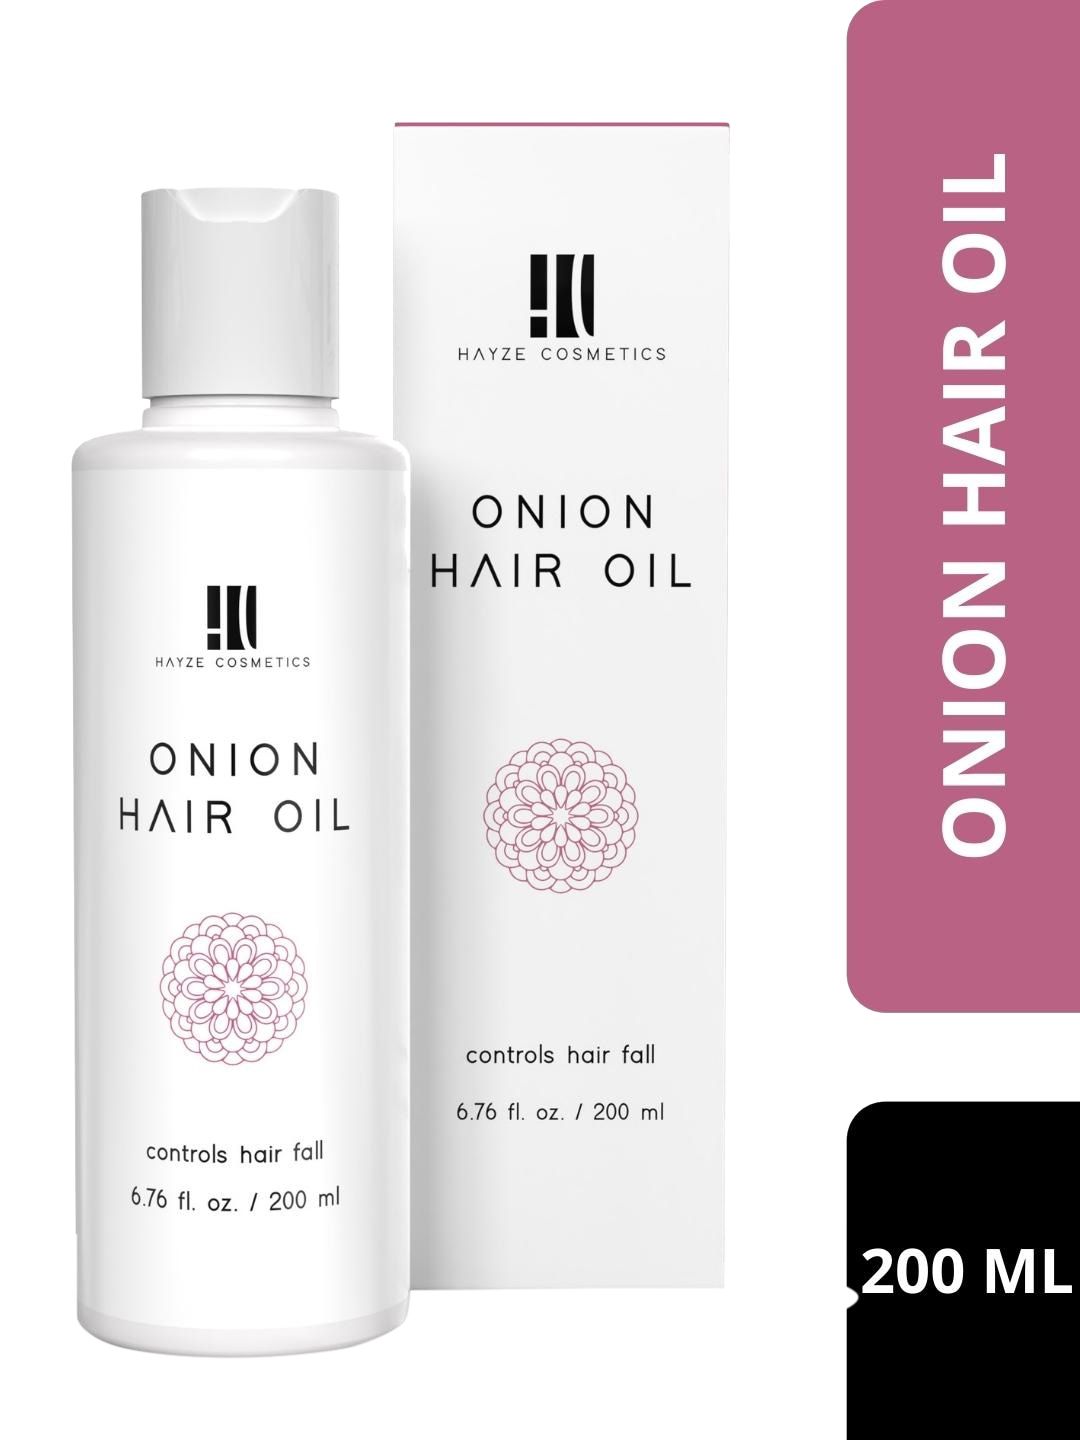 HAYZE COSMETICS Onion Hair Oil for Hair Fall Control & Growth  200 ml Price in India